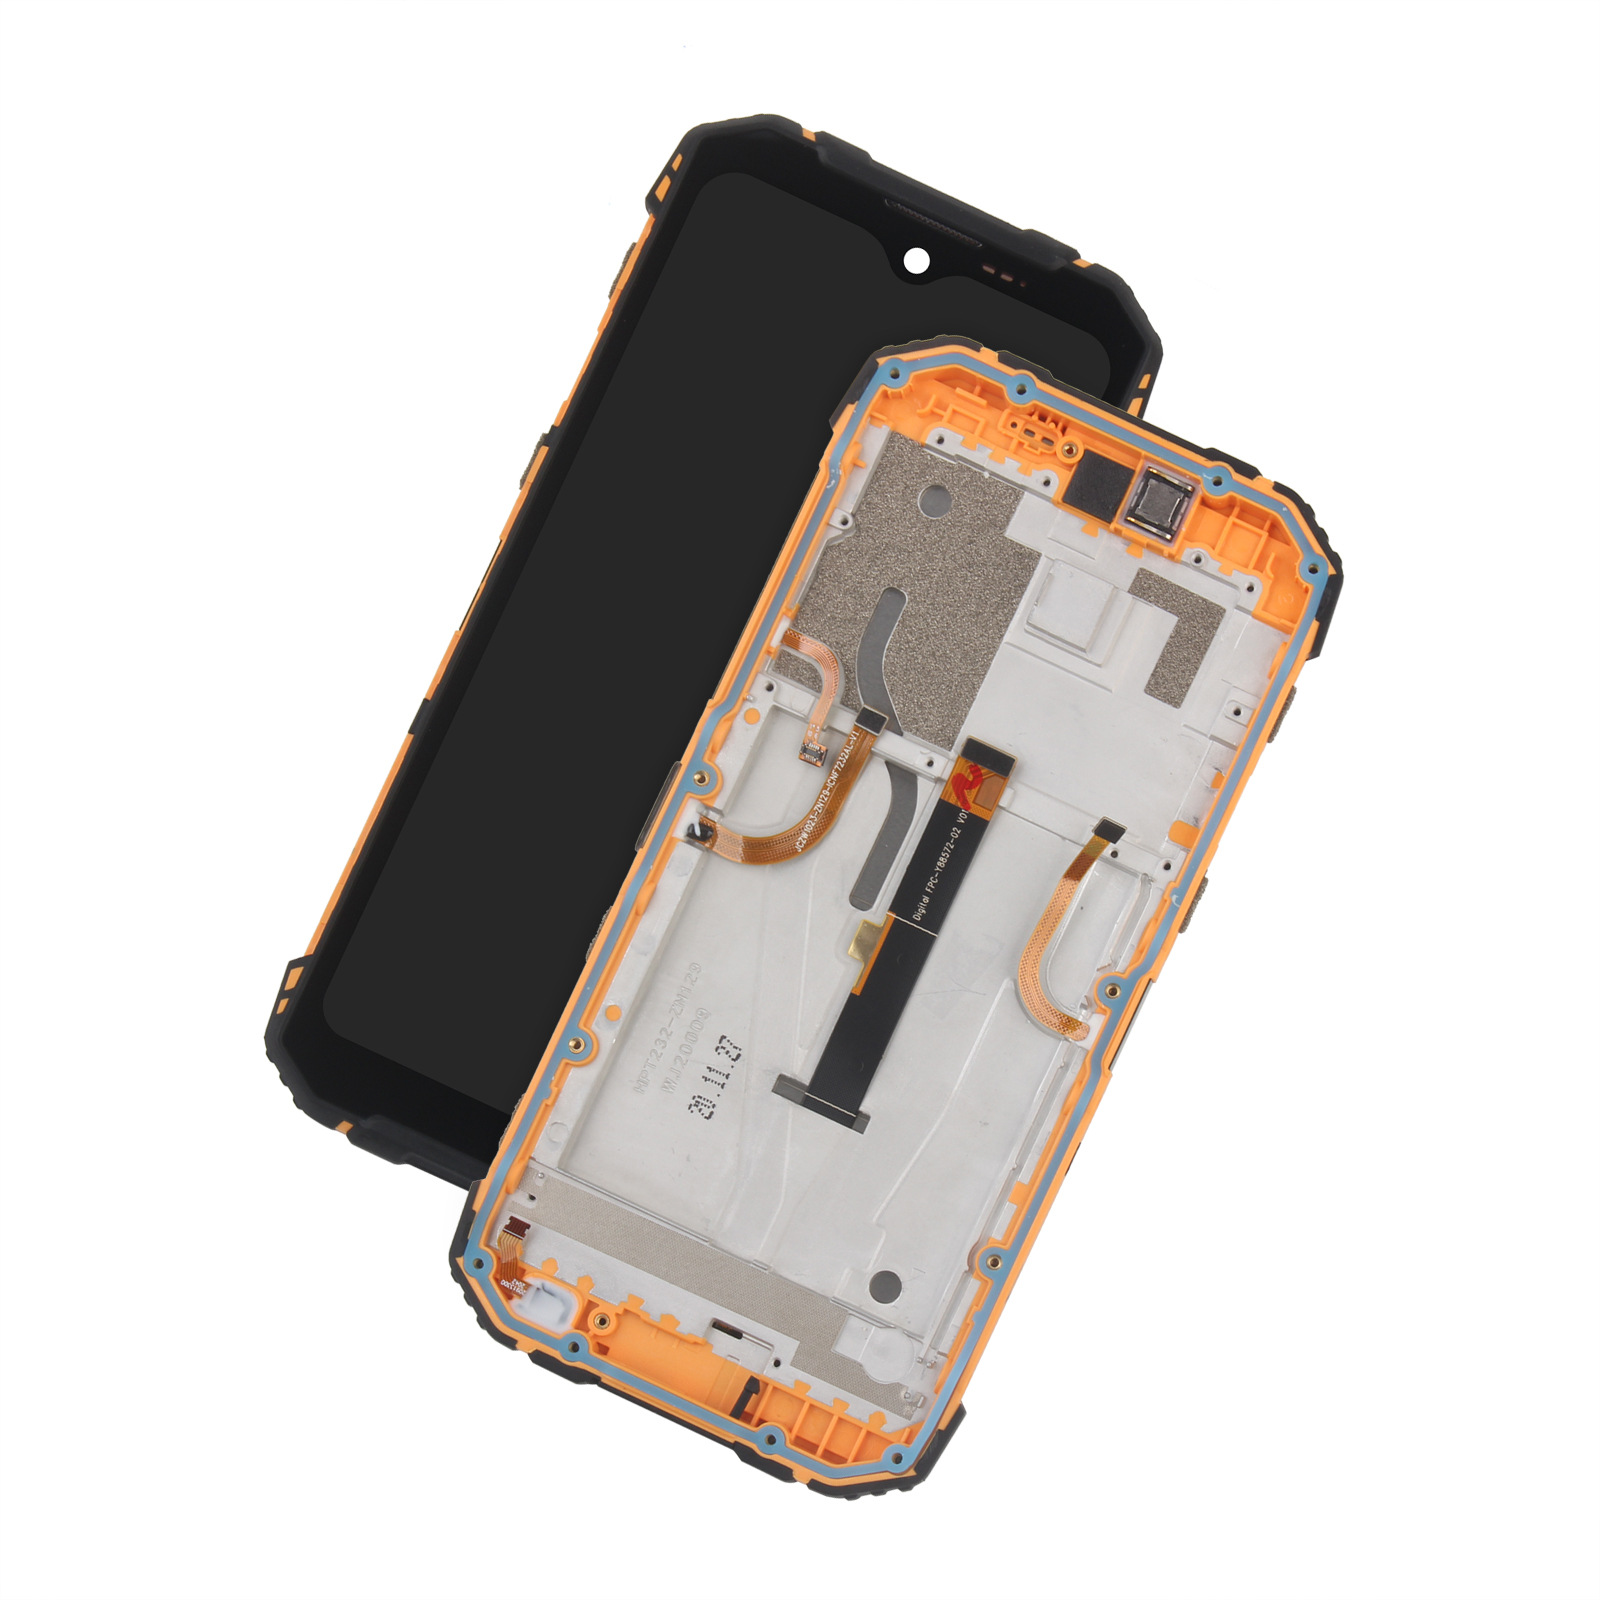 DOOGEE-Original-for-Doogee-S96-Pro-LCD-Display--Touch-Screen-Digitizer-Assembly-Replacement-Parts-wi-1868571-2